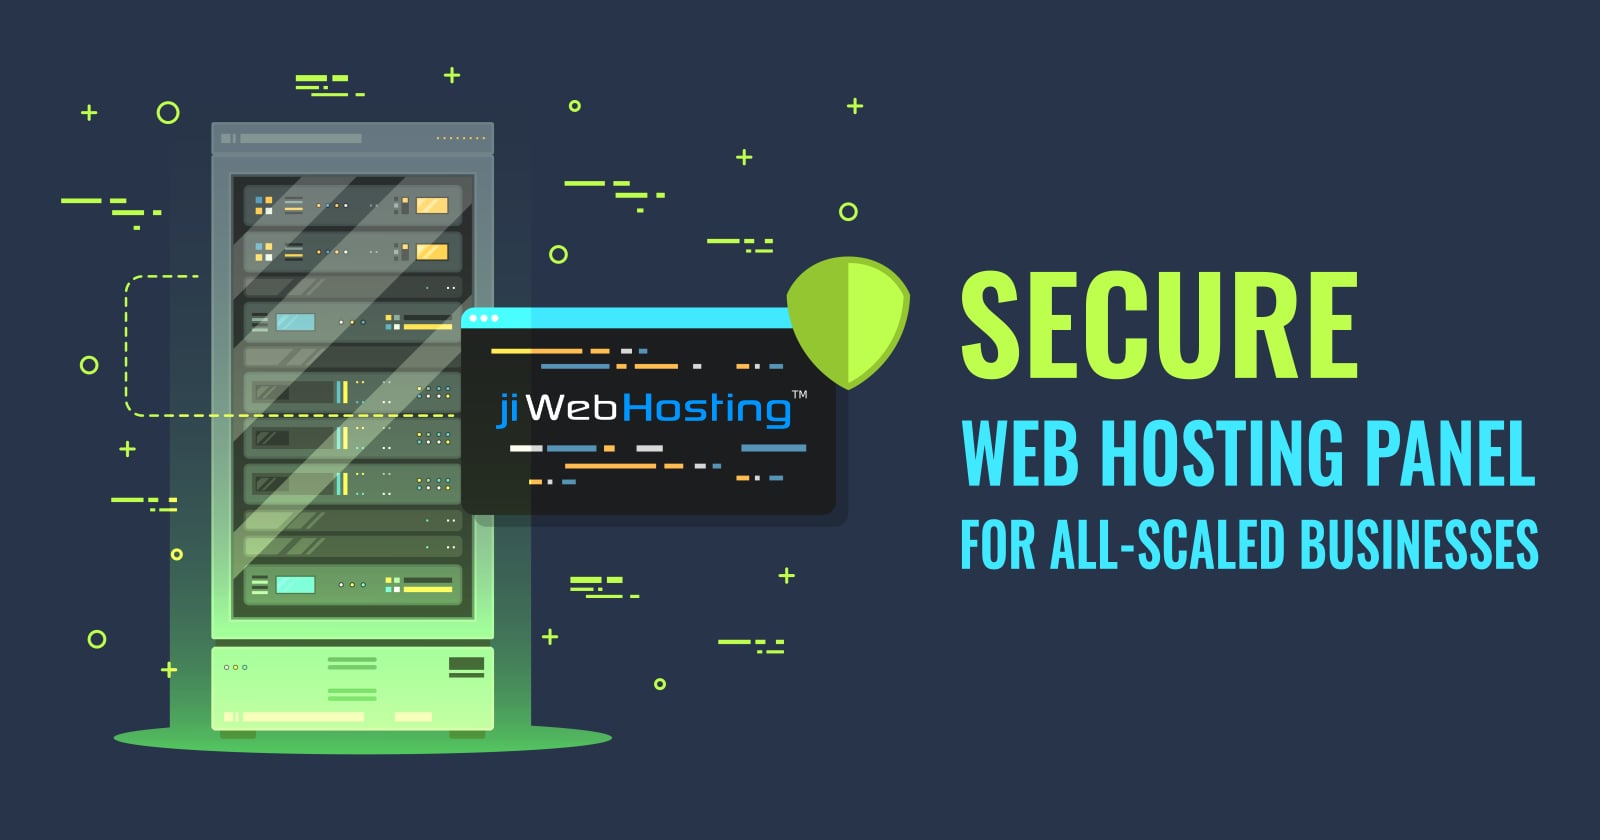 Secure Web Hosting Panel For All-scaled Businesses